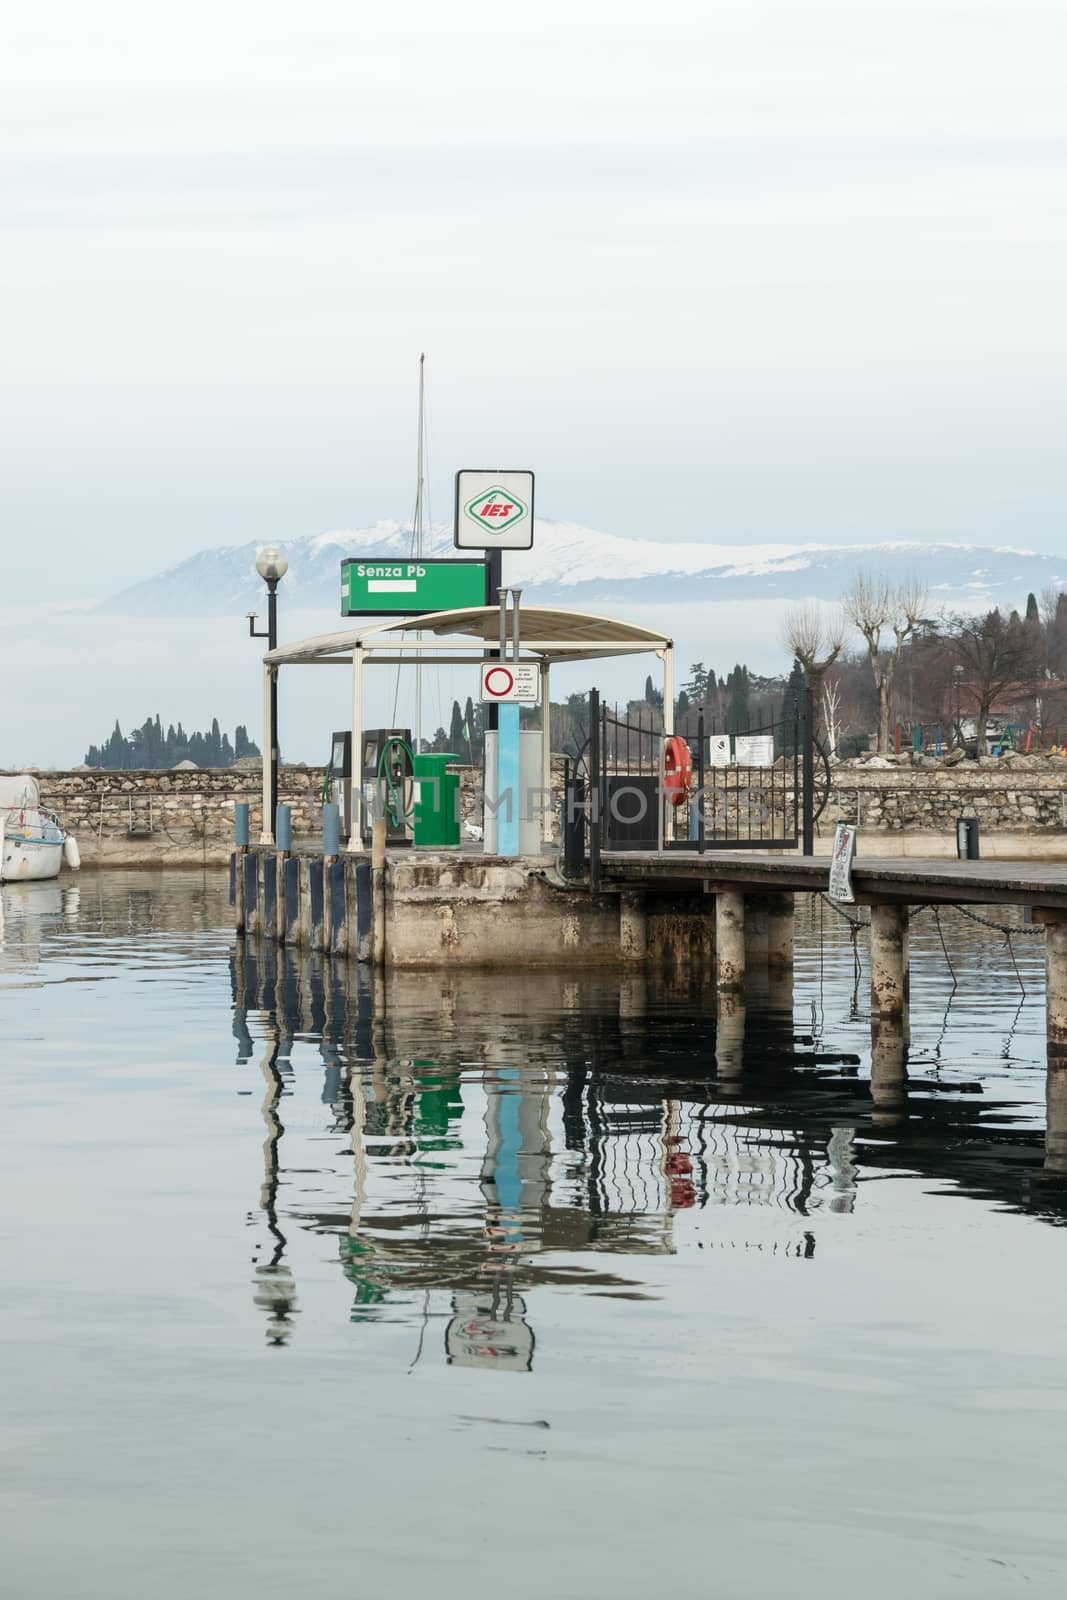 Petrol station for boats on Lake Garda. by Isaac74